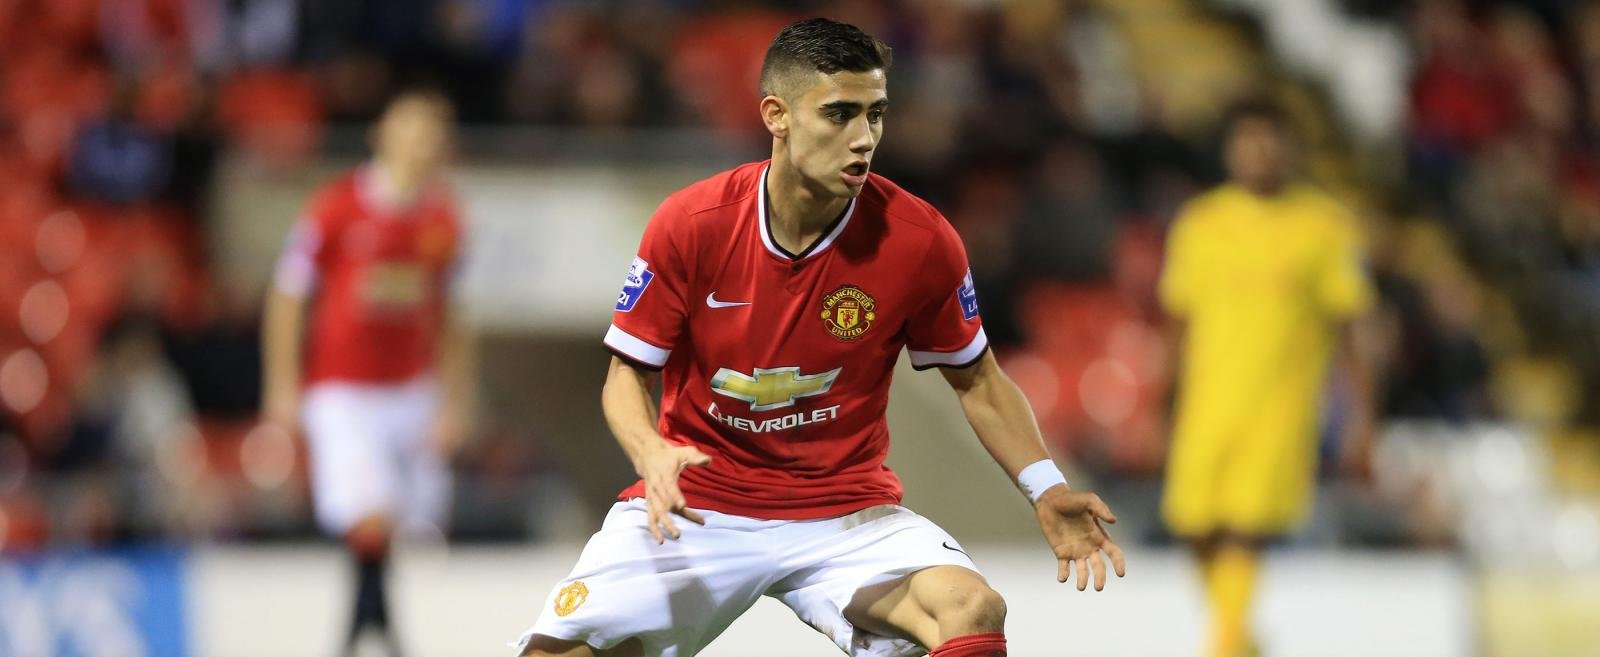 One to Watch: Manchester United’s Andreas Pereira